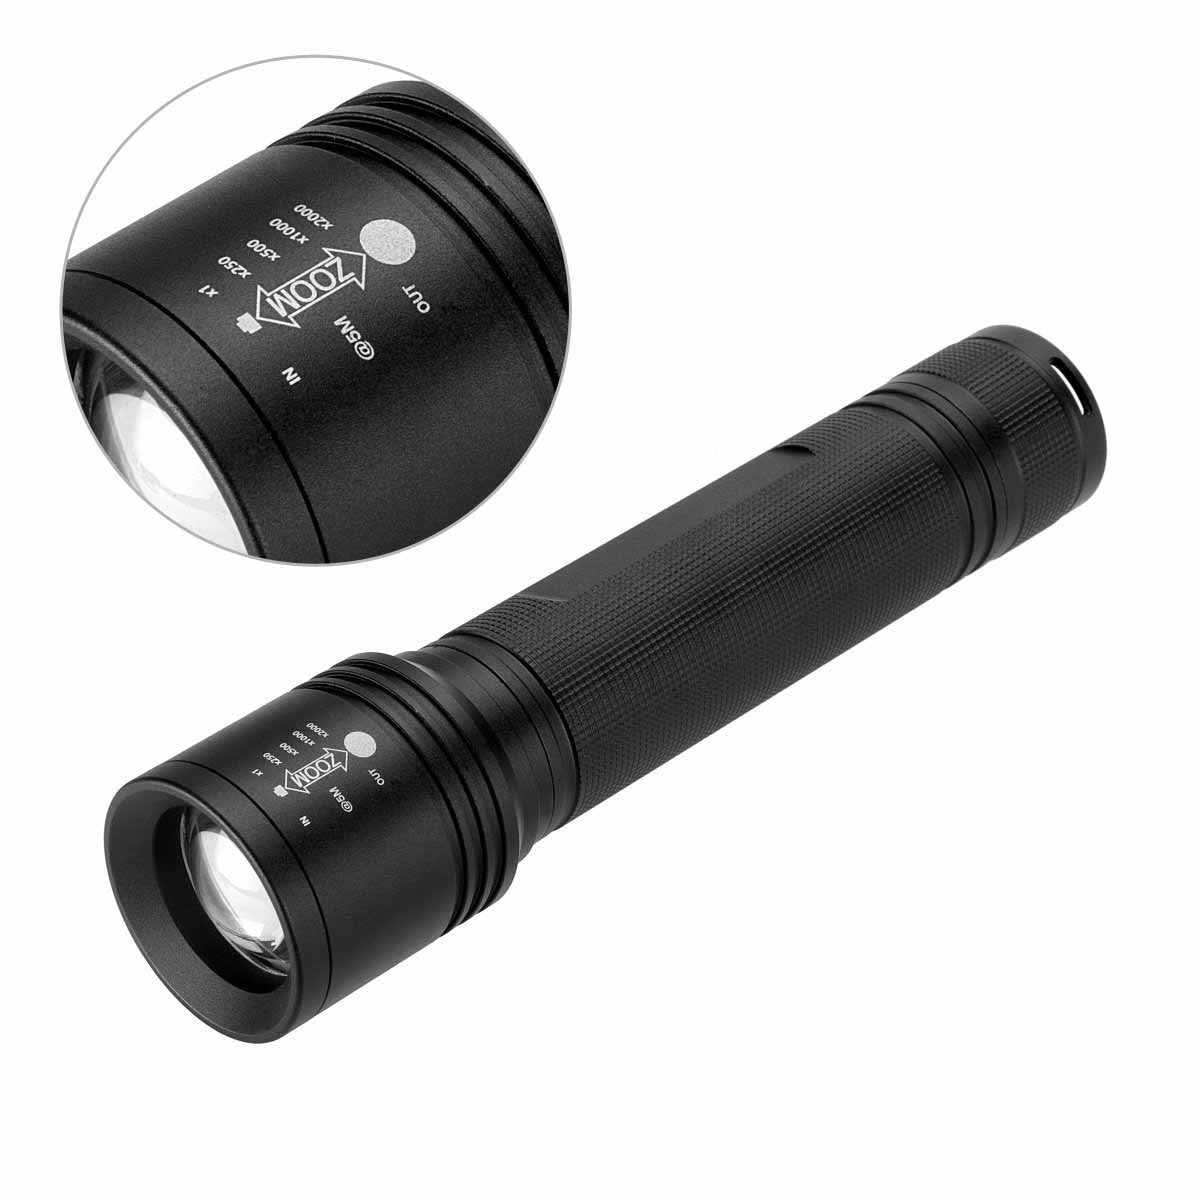 High-Powered LED Handheld Flashlight is equipped with a zoom 